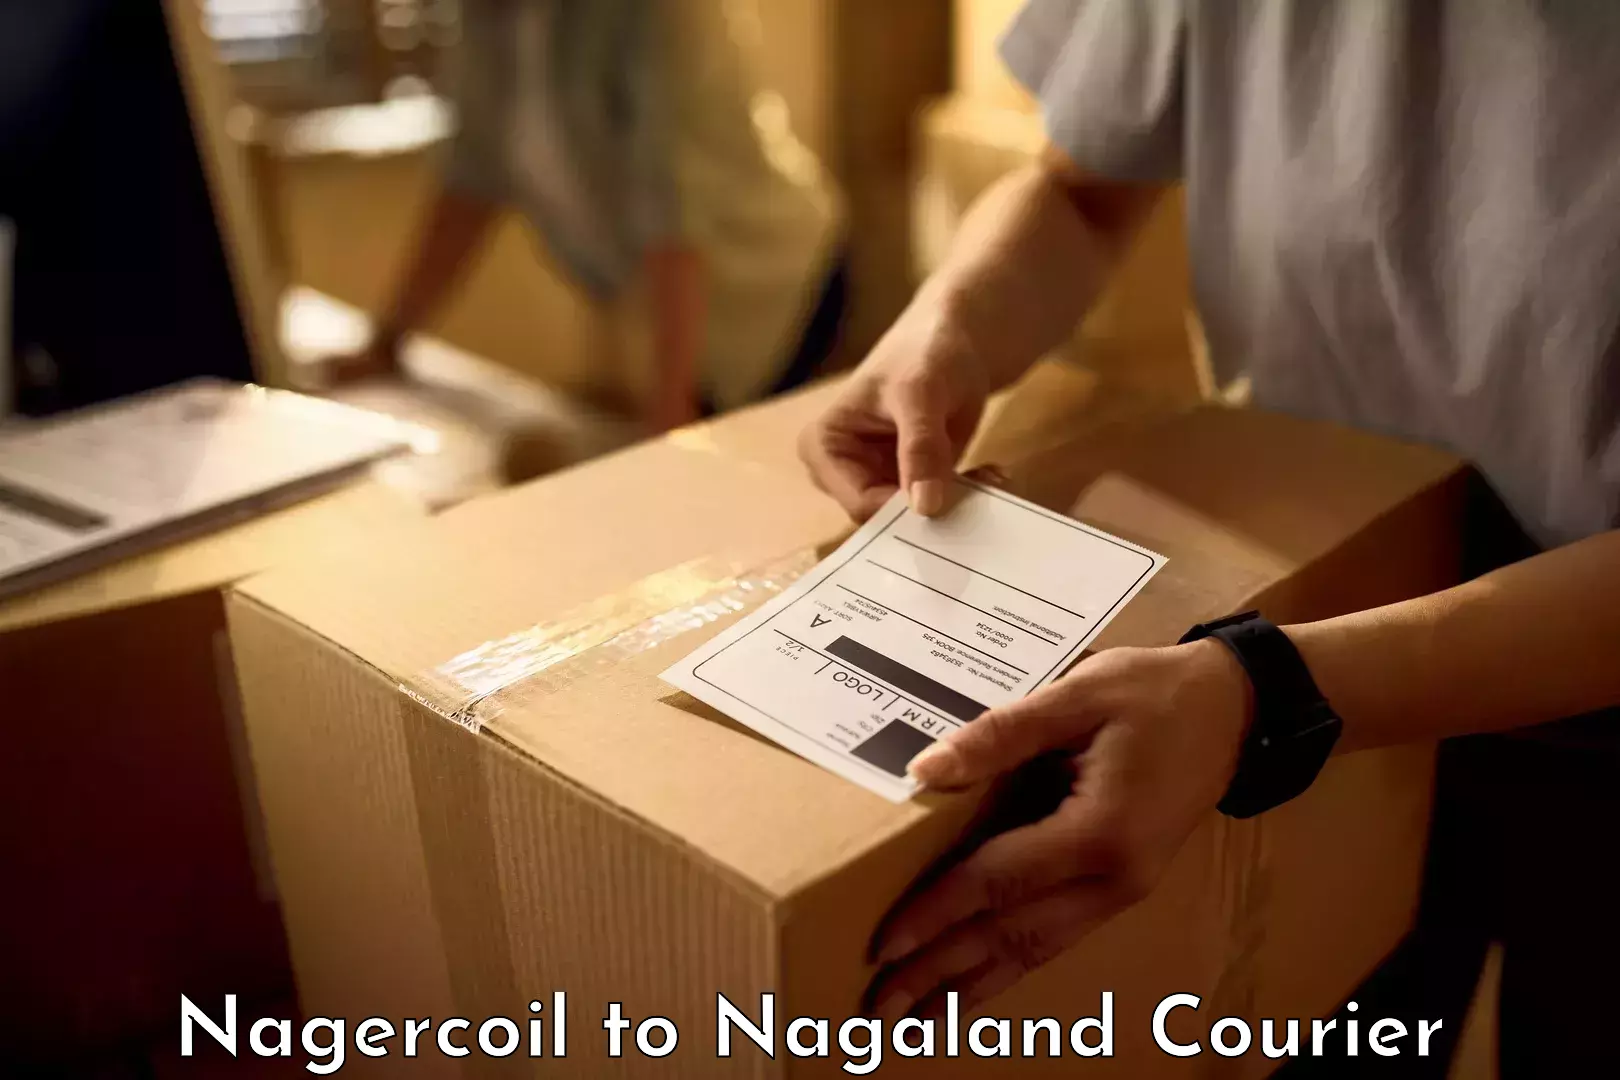 Baggage transport network Nagercoil to Mokokchung